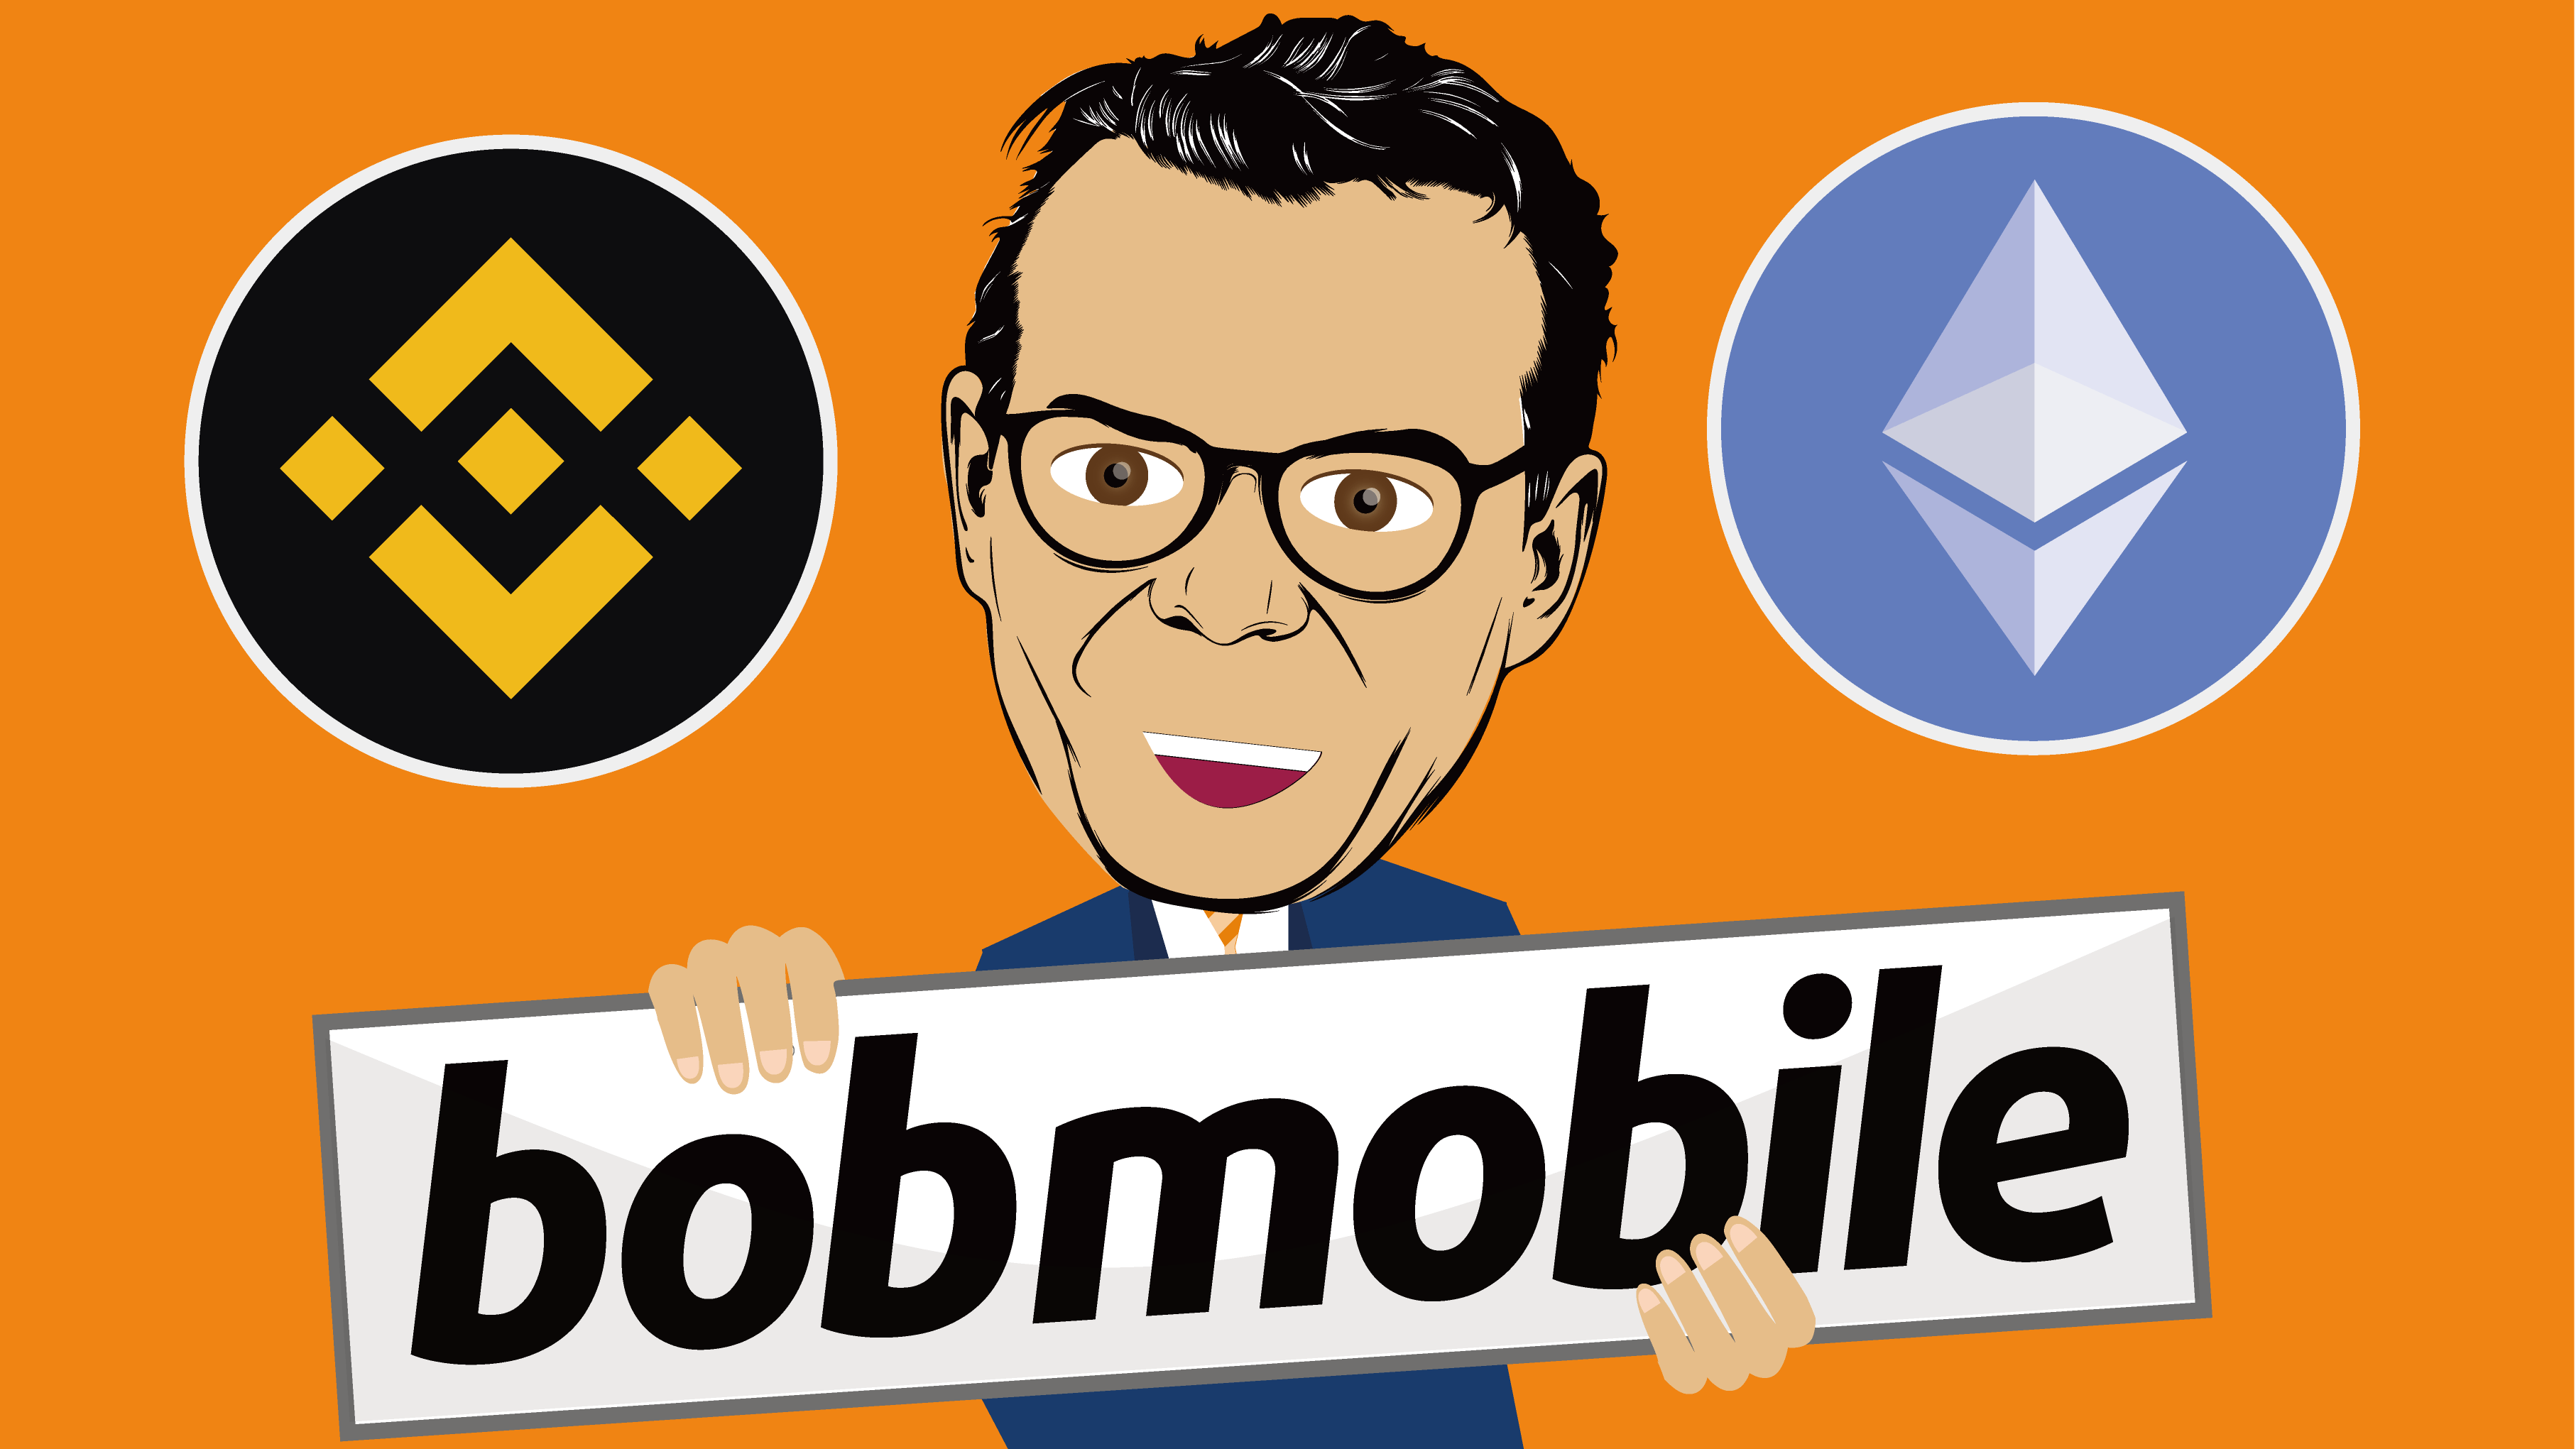 Bobmobile is now also offering ETH and BNB.